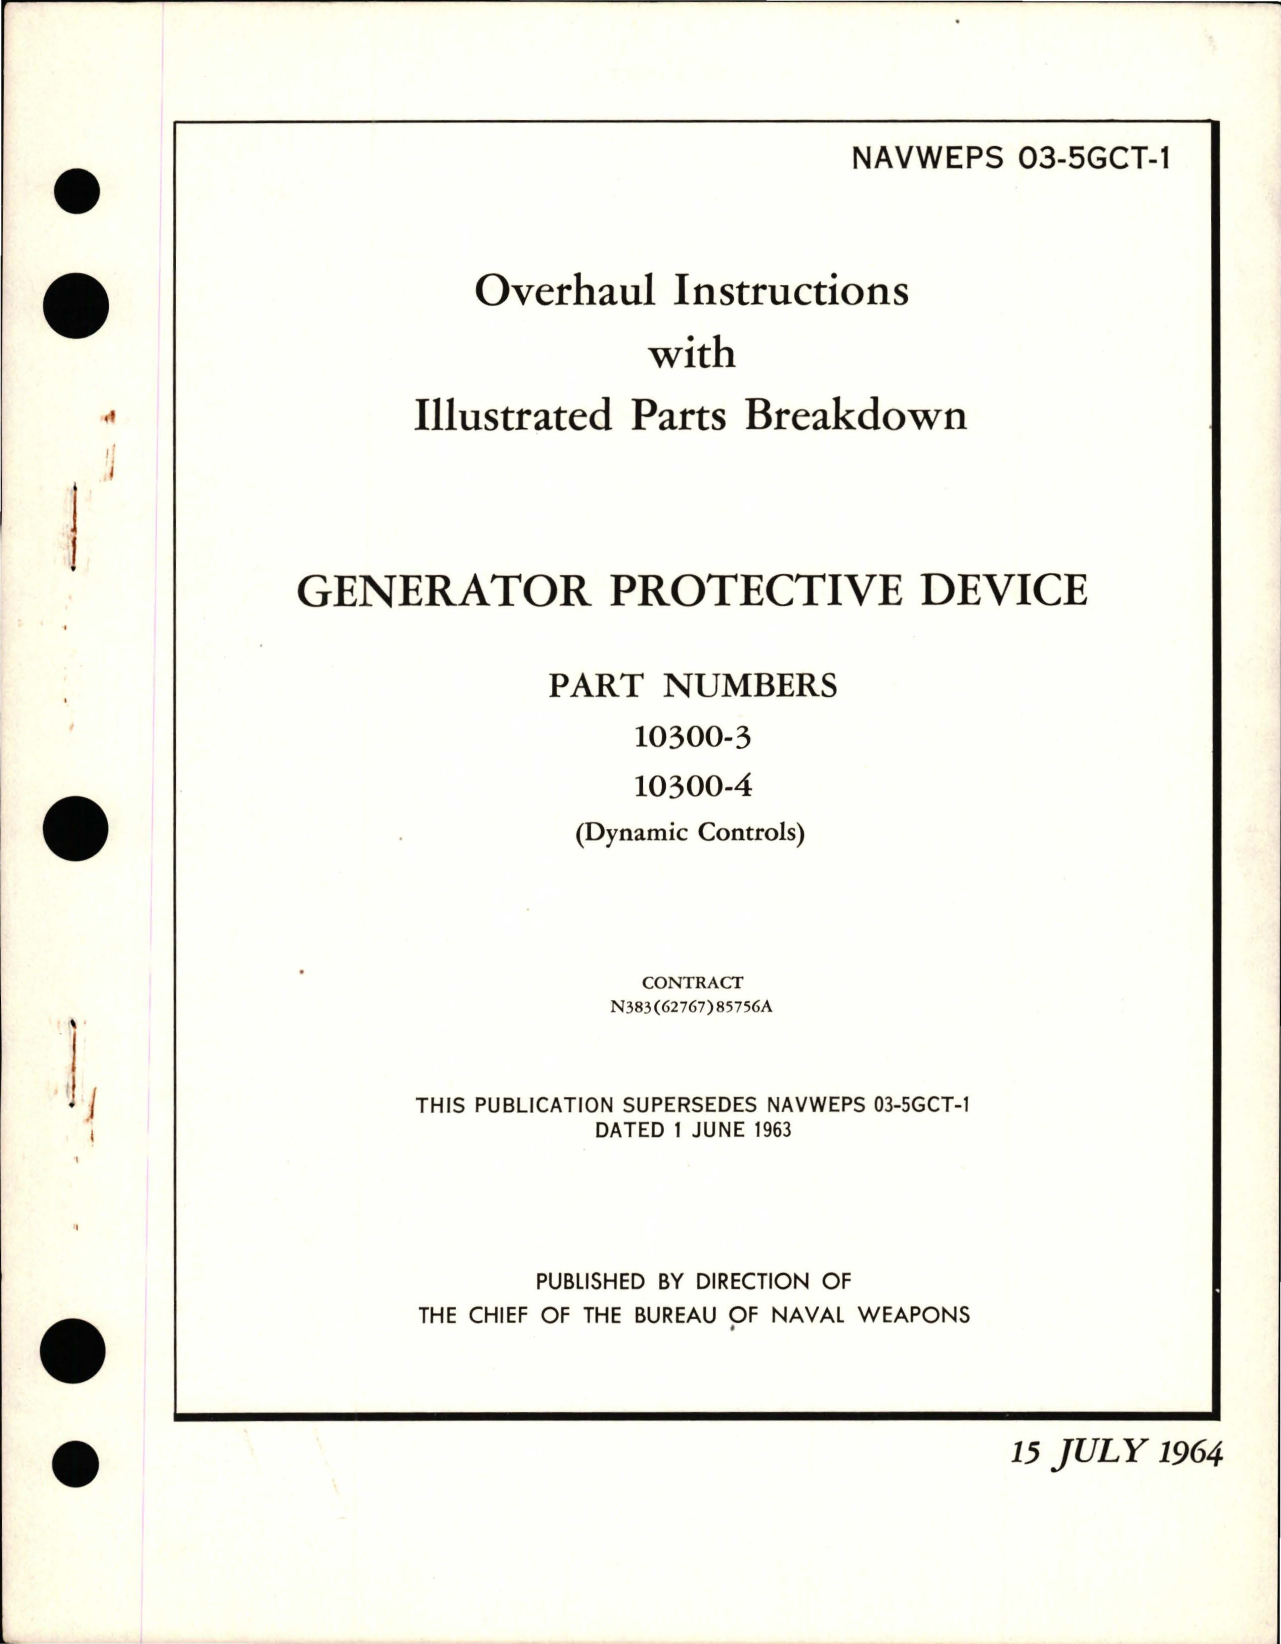 Sample page 1 from AirCorps Library document: Overhaul Instructions with Illustrated Parts Breakdown for Generator Protective Device - Parts 10300-3 and 10300-4